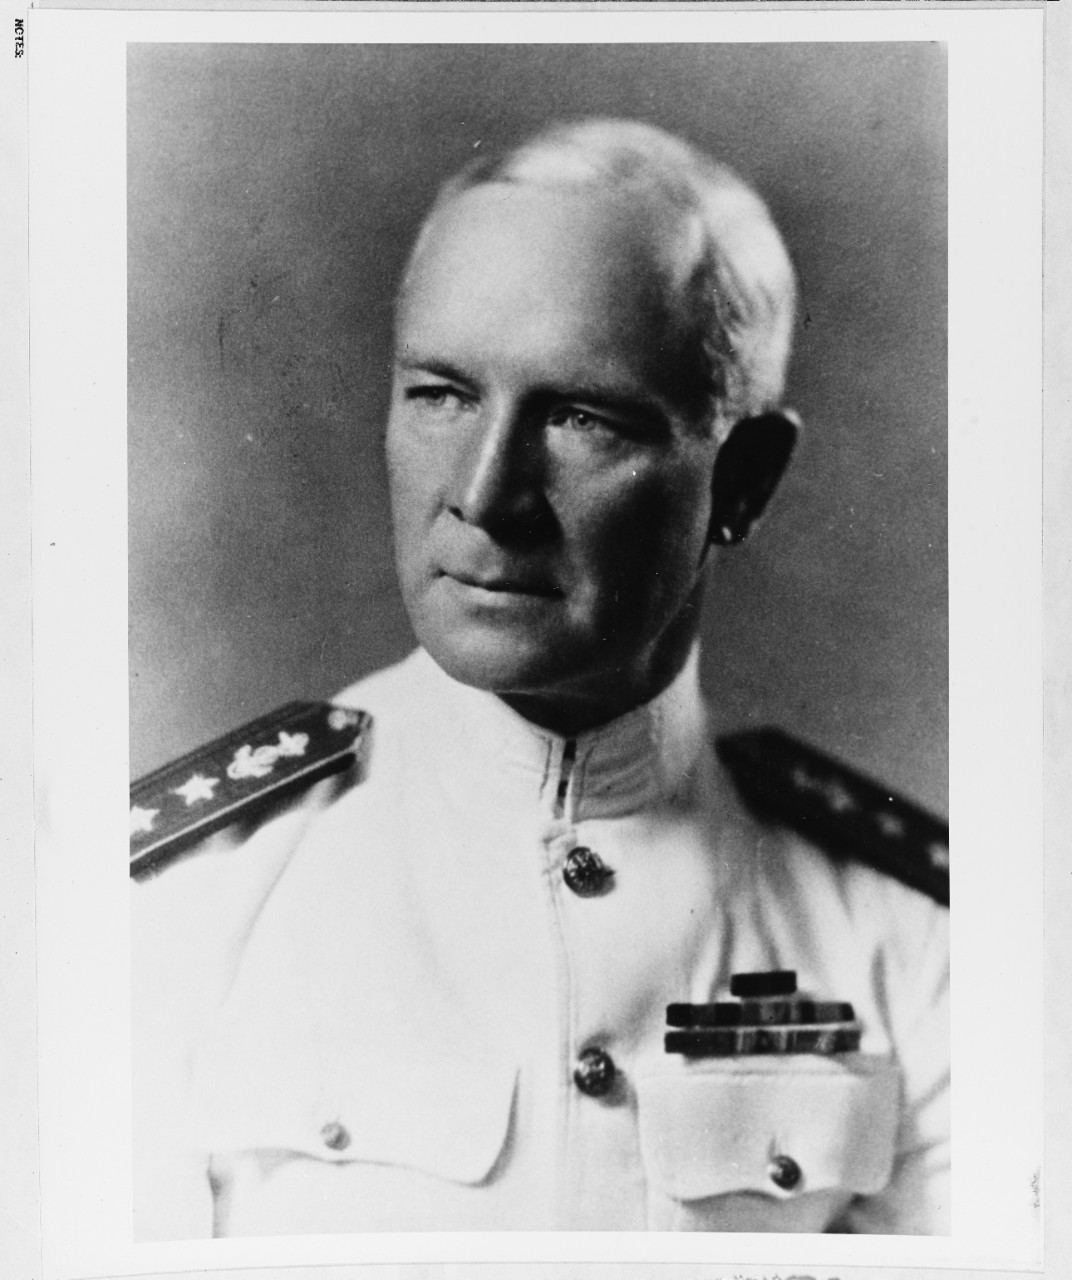 Rear Admiral Wat Tyler Cluverius, U.S. Naval Academy class of 1896.